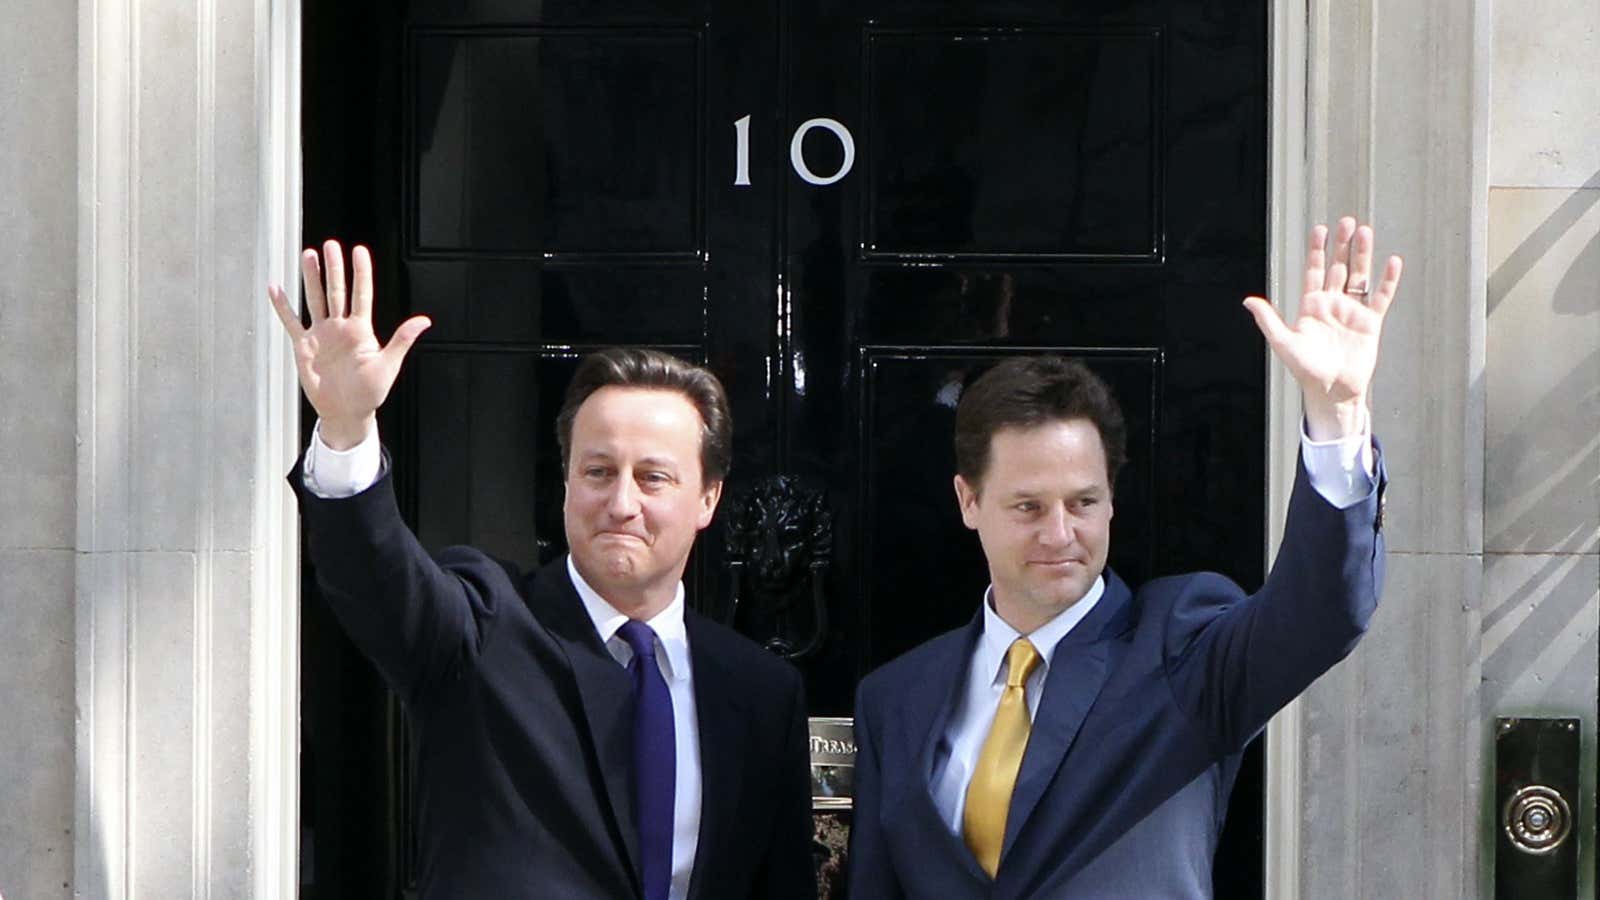 Hands up for a coalition?